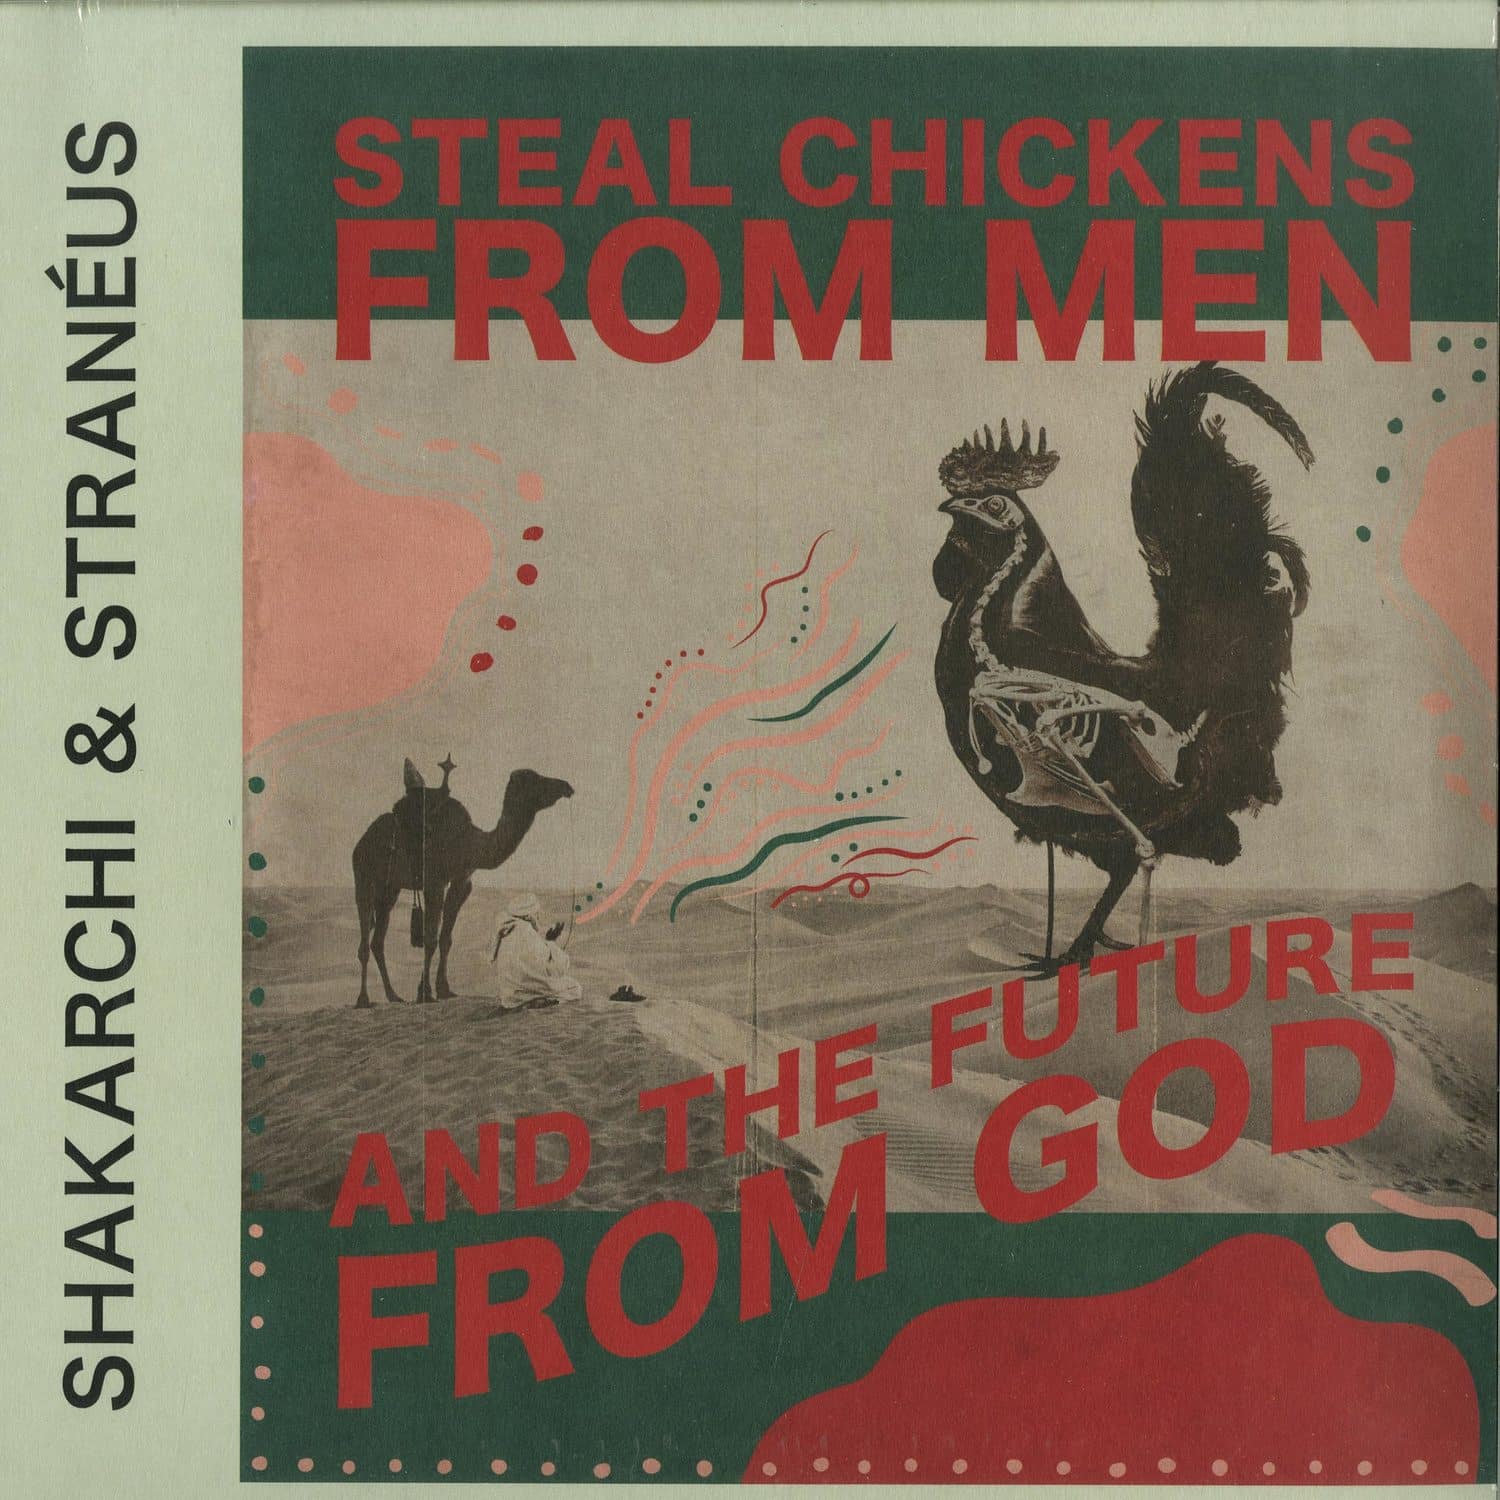 Shakarchi & Straneus - STEAL CHICKENS FROM MEN AND THE FUTURE FROM GOD 